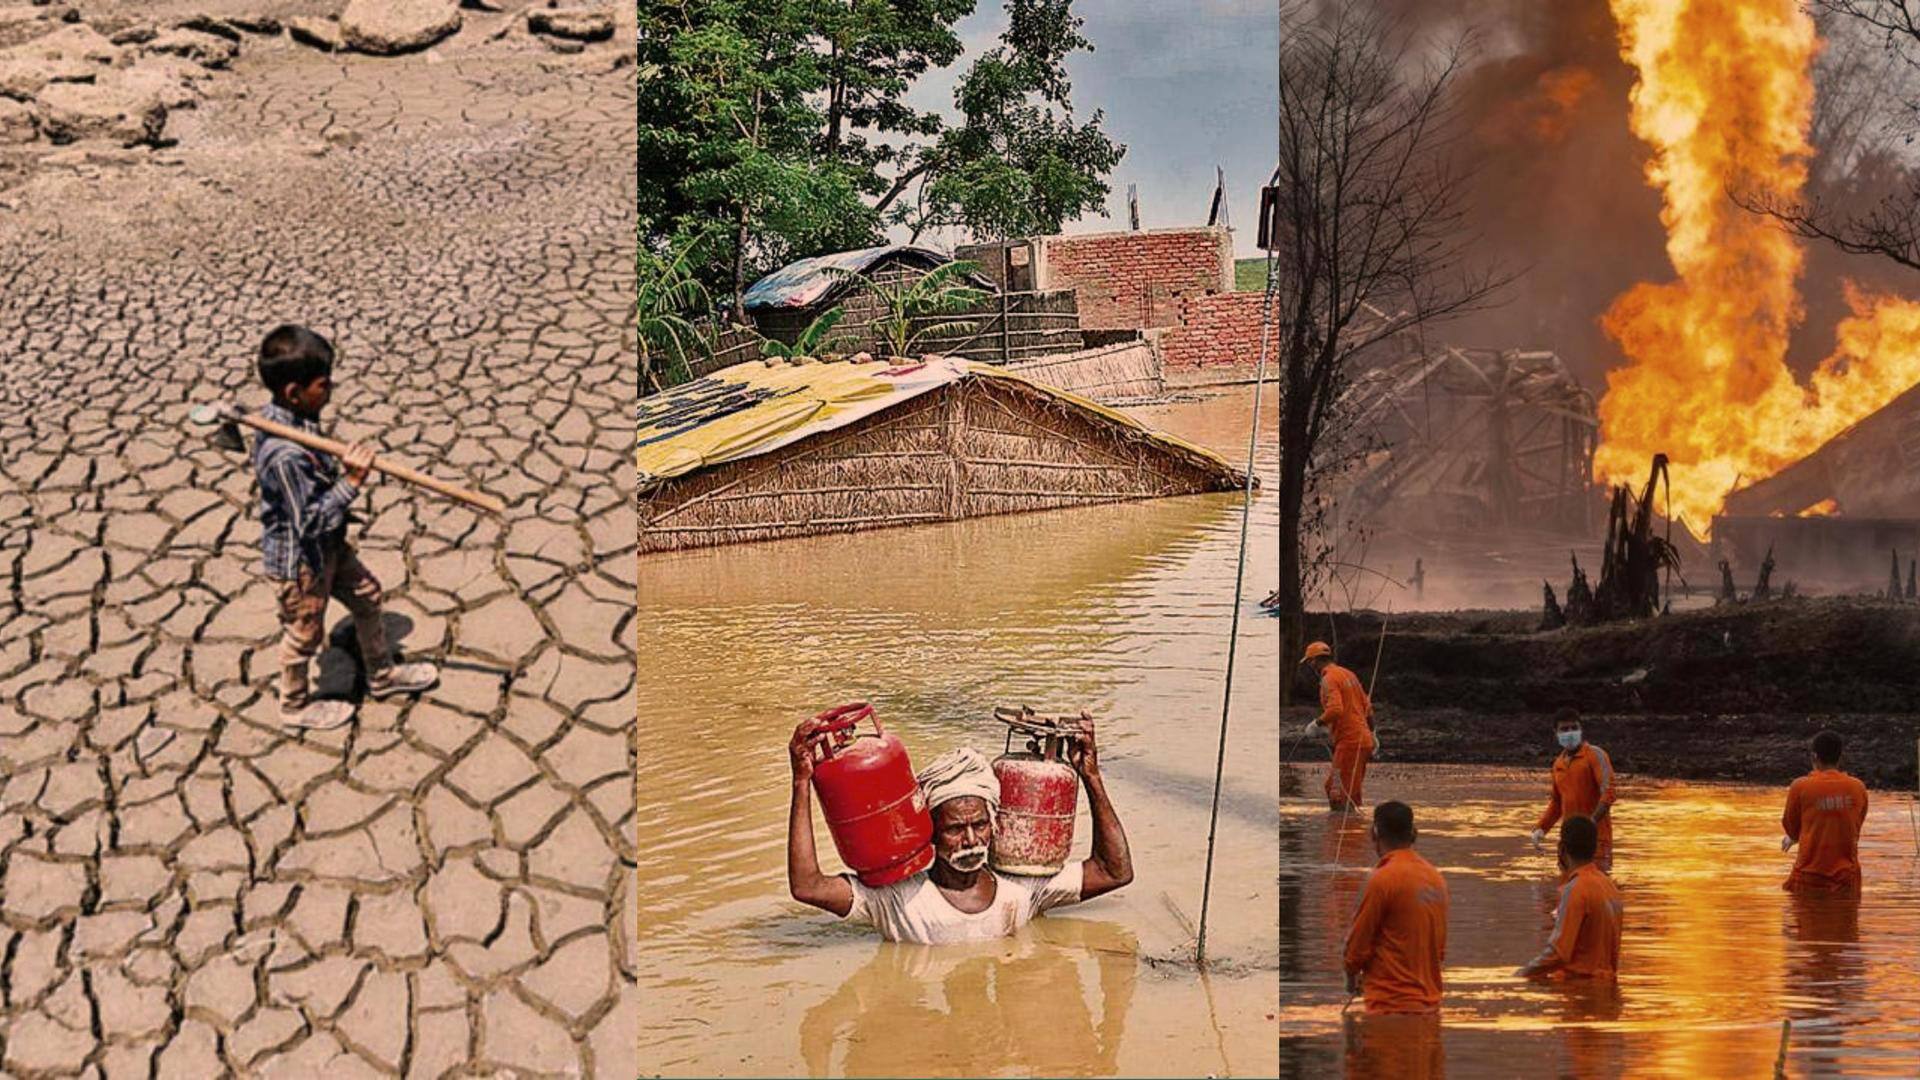 Several Indian states among top 50 regions facing climate risk